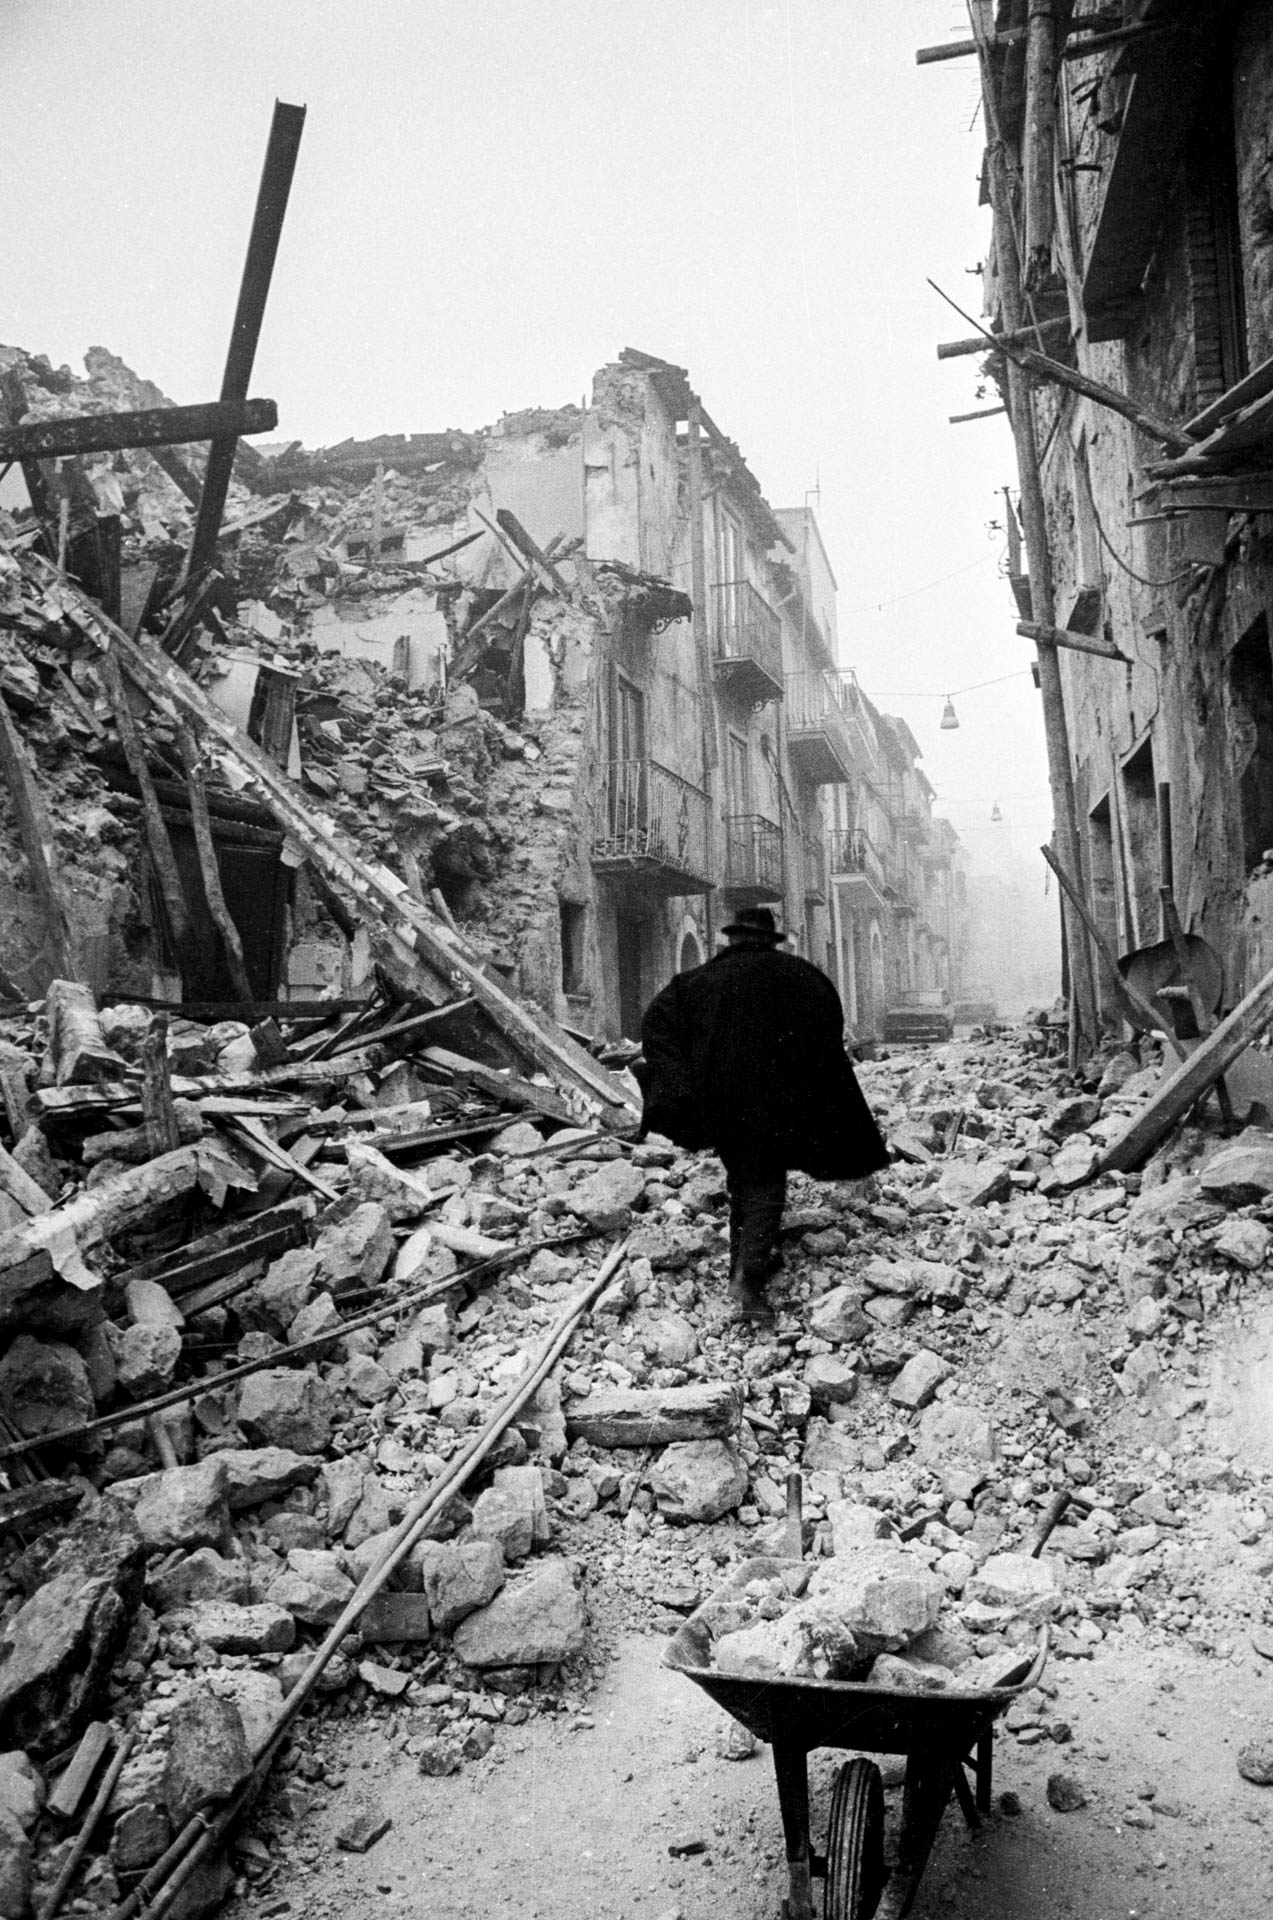  Basilicata, 24 November 1980
At 19,35 pm of the night of 23 November, the biggest earthquake in Italy destroys a large part of Campania and Basilicate towns and villages. More than 3000 people dead, 250,000 homeless. 
© GIANNI GIANSANTI 